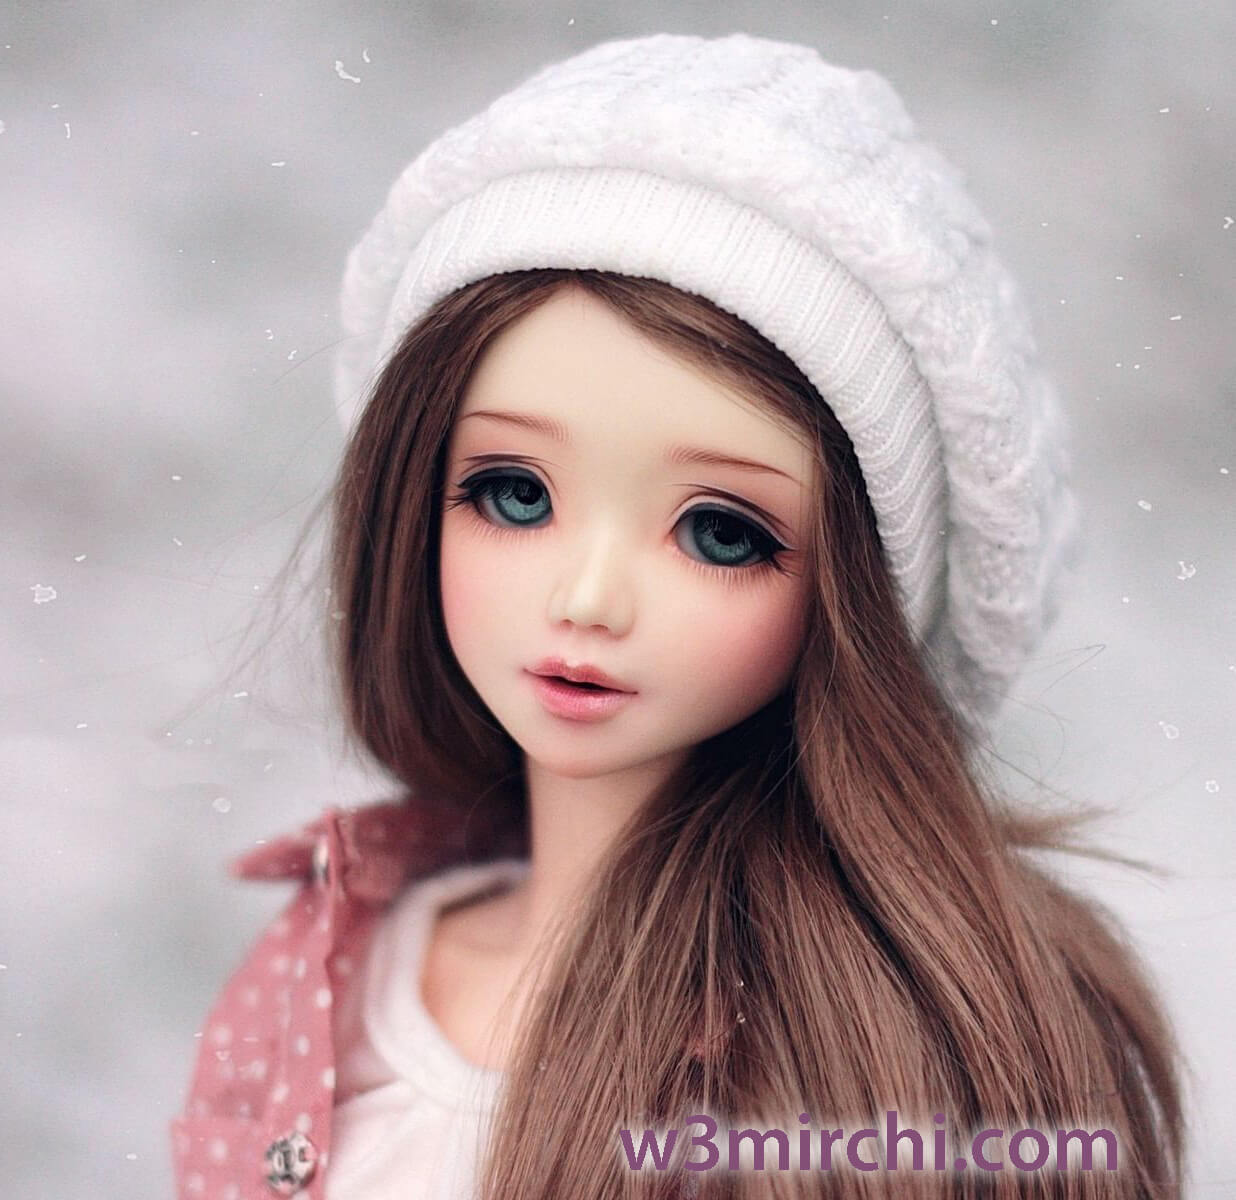 Barbie doll image for dp and whats app - Beautiful & Cute Barbie ...